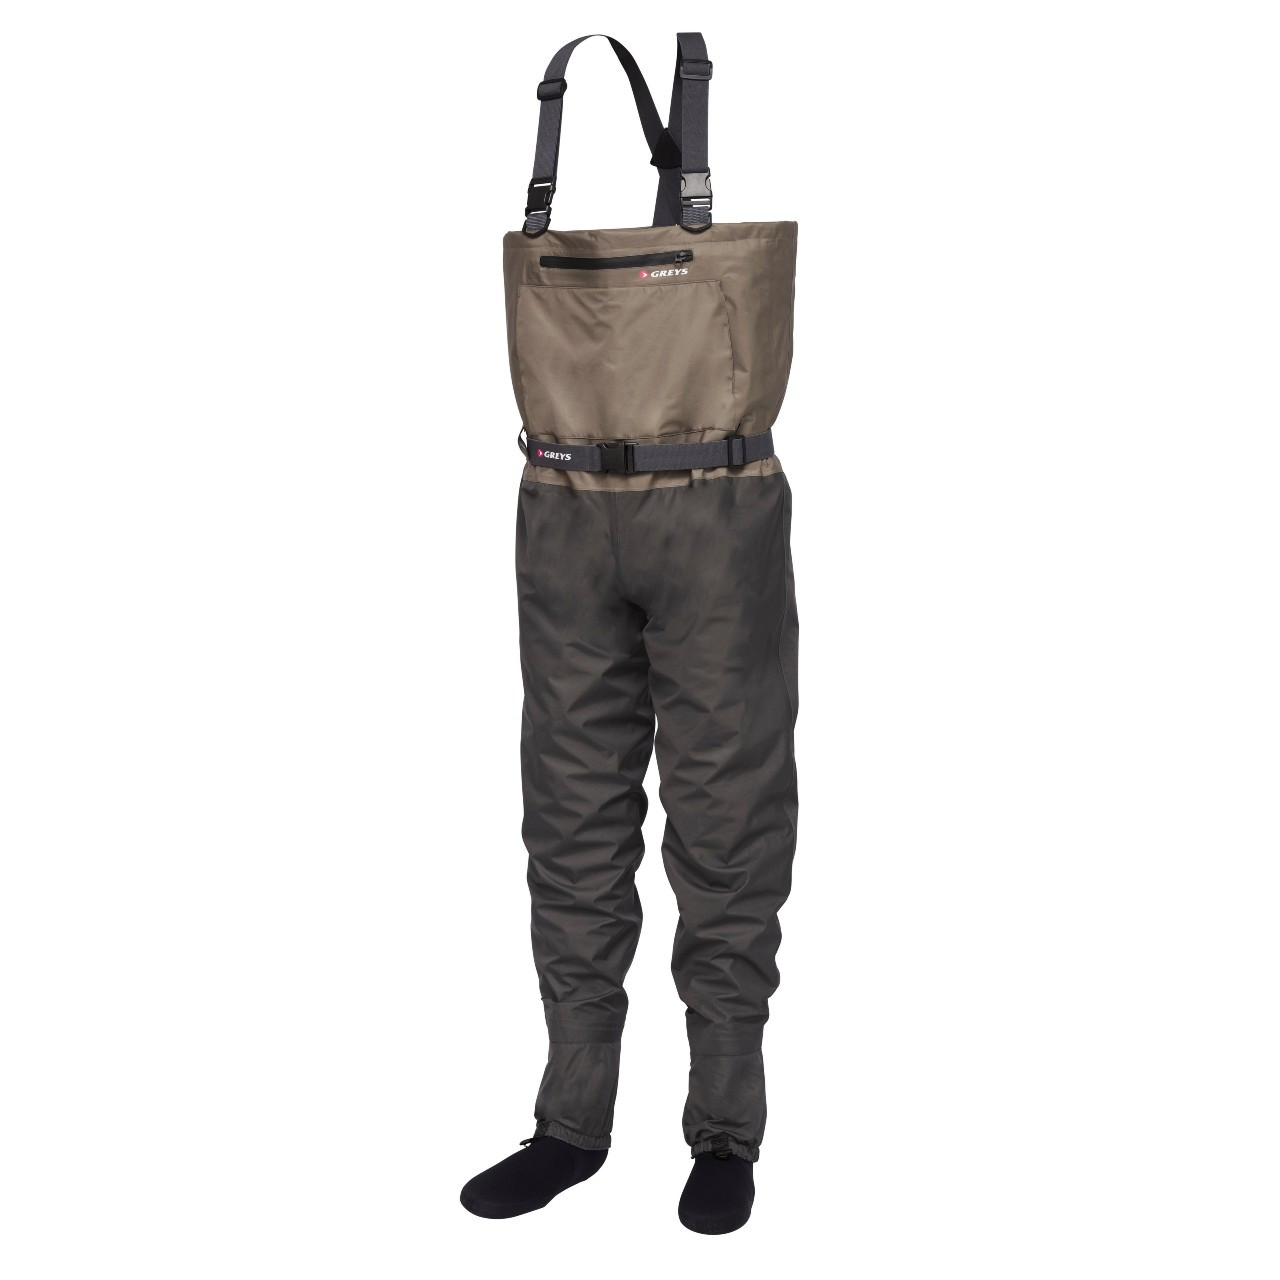 https://cdn11.bigcommerce.com/s-1uj8v2hz/images/stencil/1280x1280/products/1461/3089/Tail_Waders__54365.1706196668.jpg?c=2